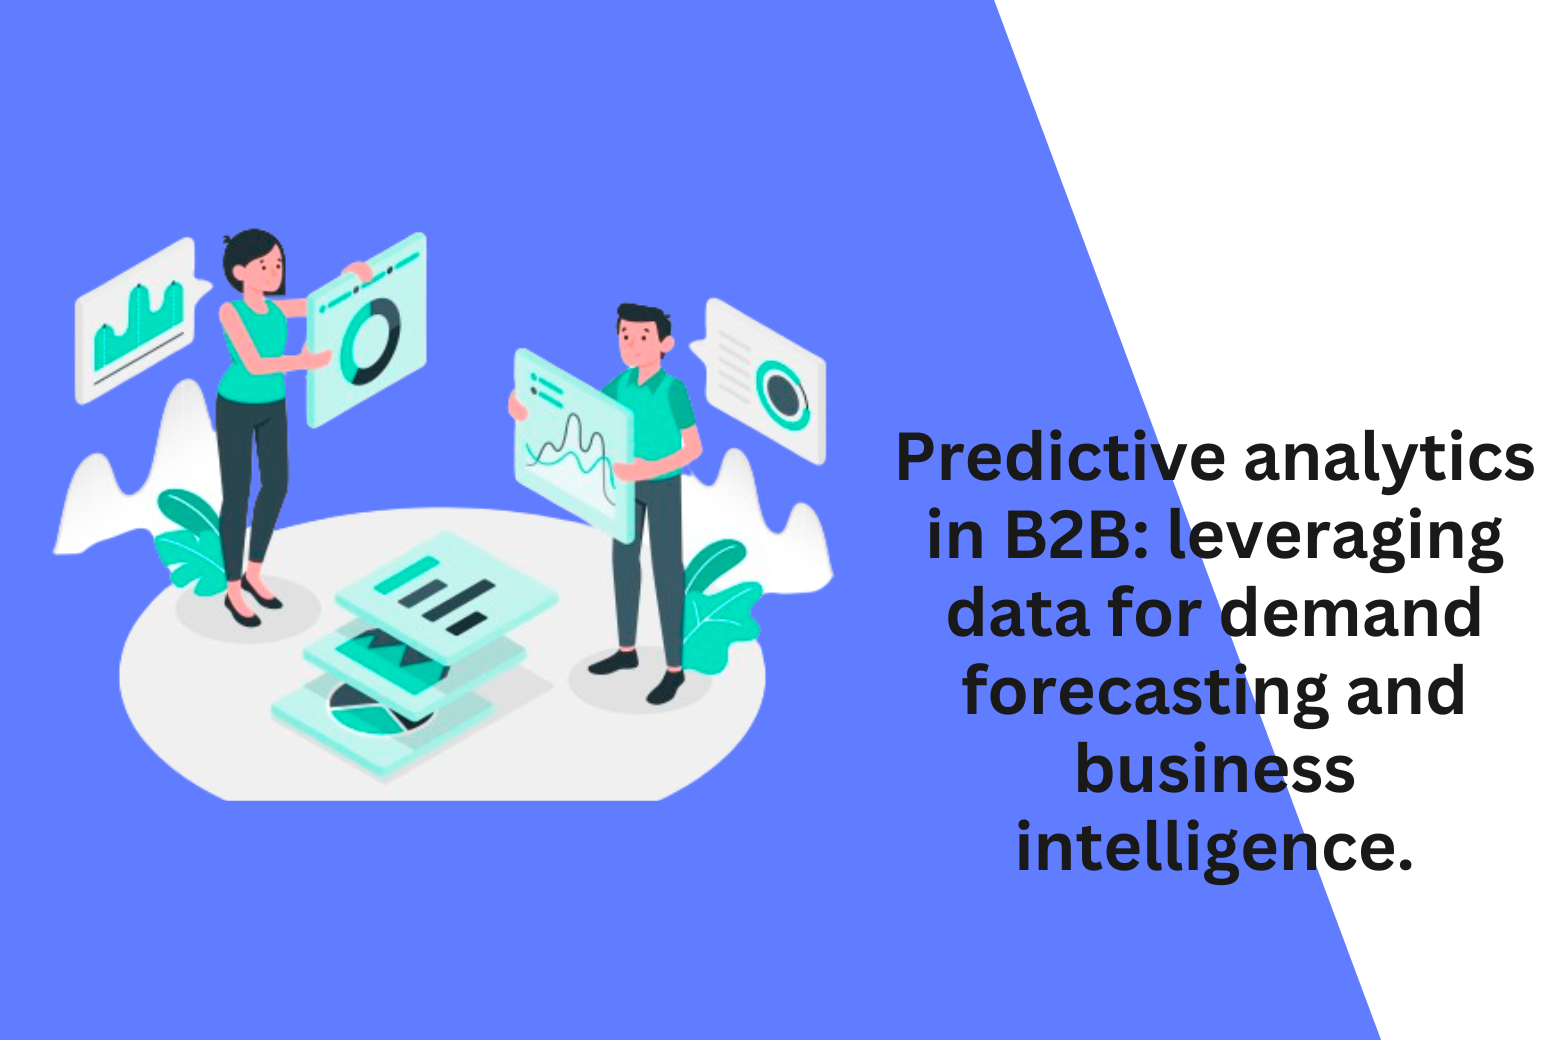 Predictive analytics in B2B: leveraging data for demand forecasting and business intelligence.